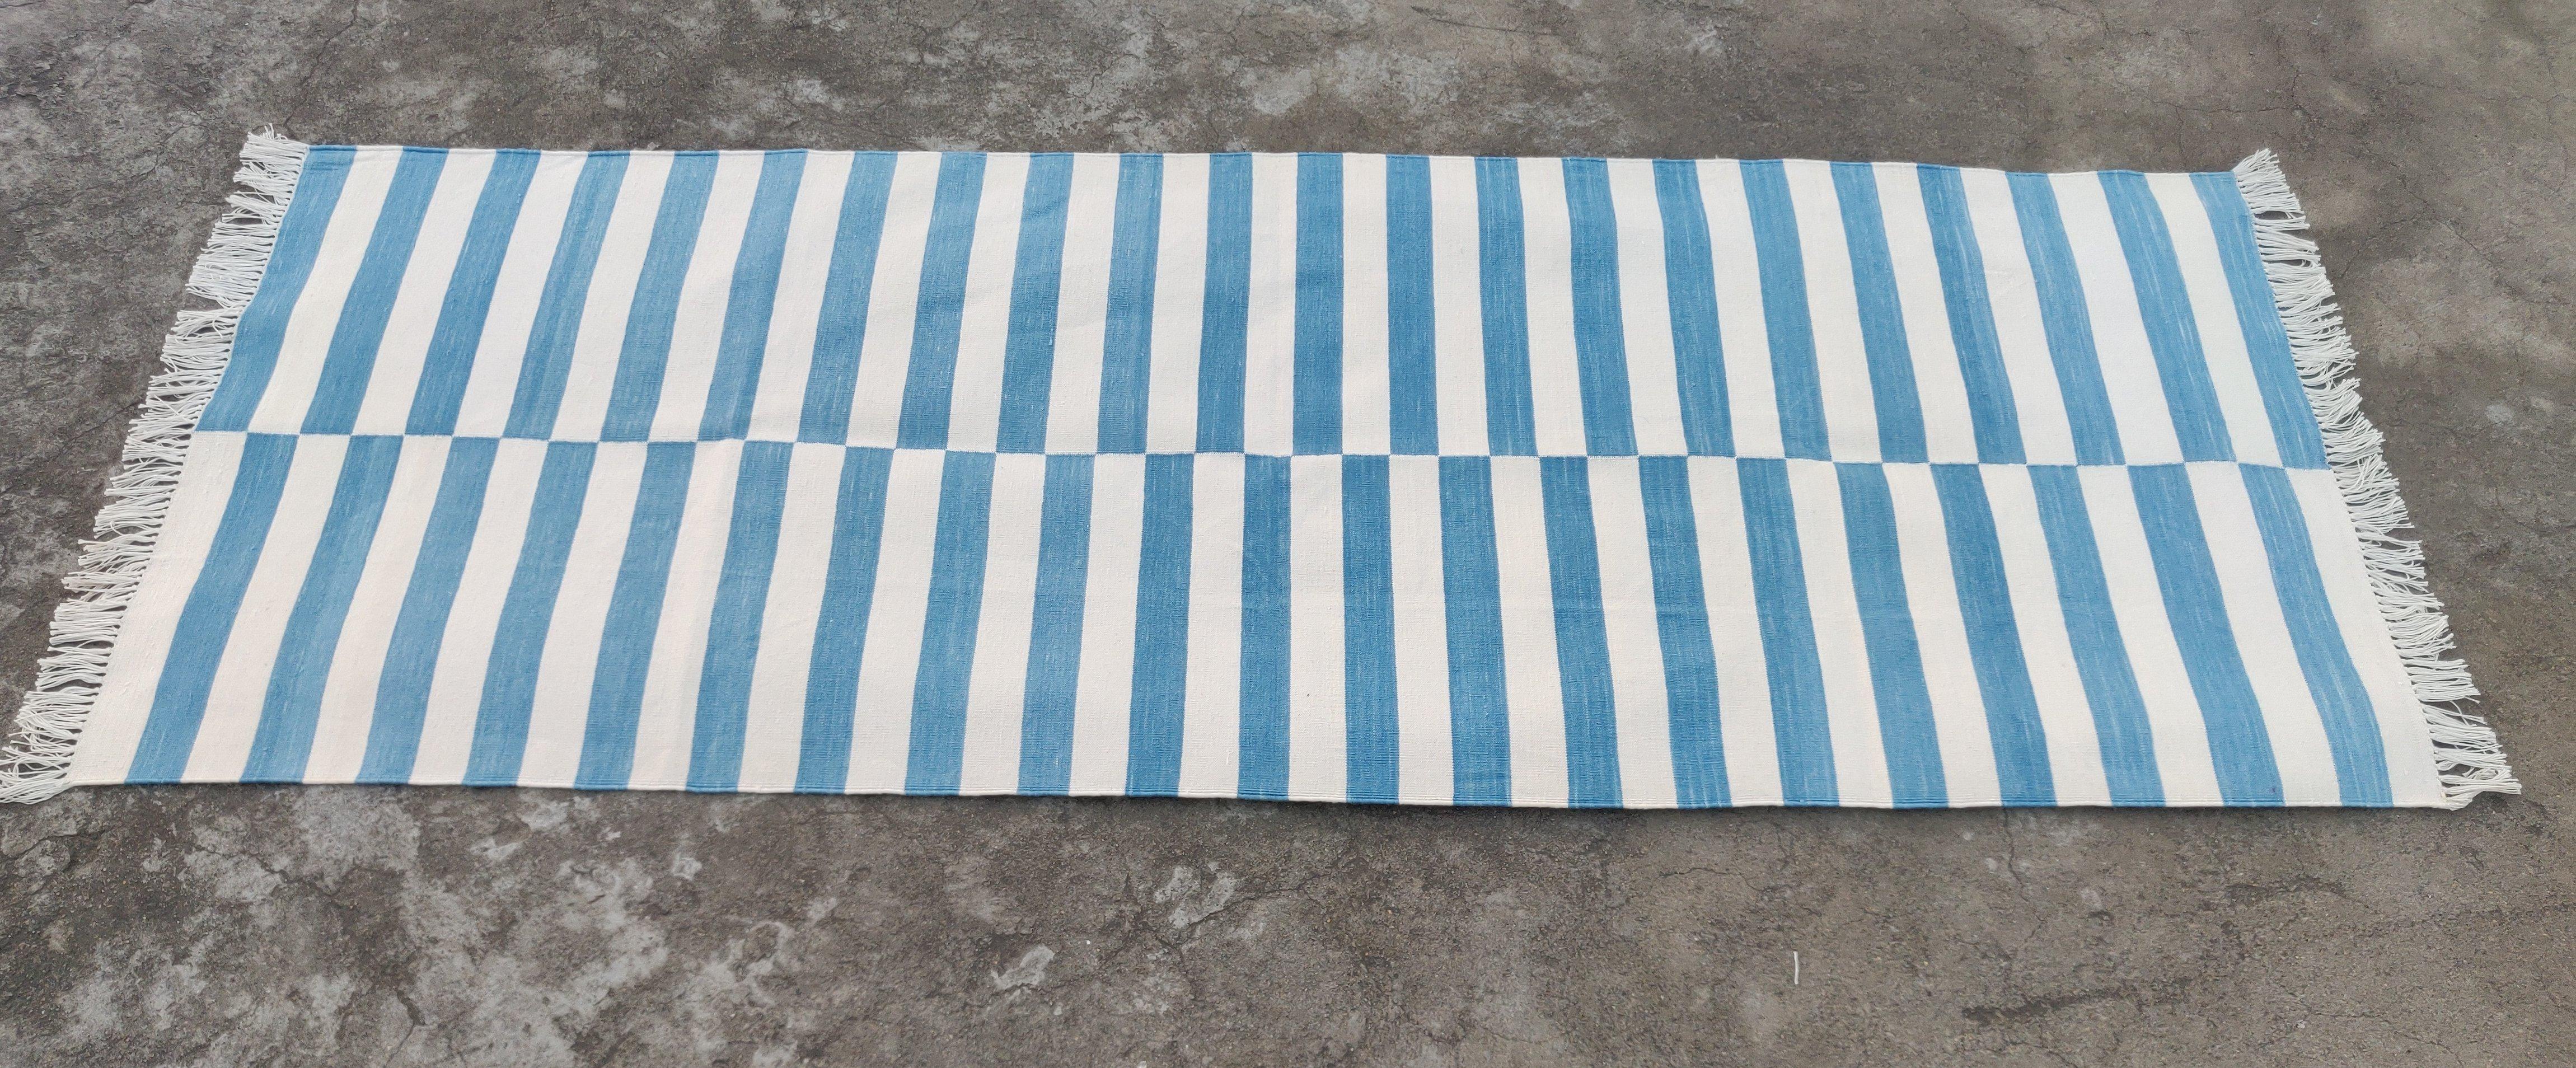 Handmade Cotton Area Flat Weave Runner, 2.5x7 Blue, White Striped Indian Dhurrie For Sale 1